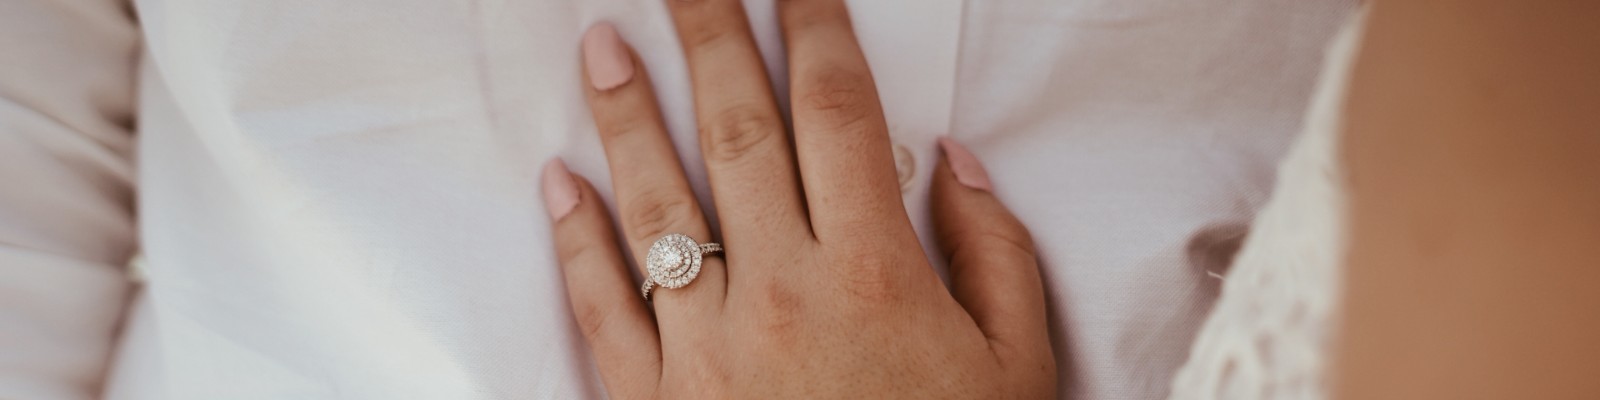 Engagement Ring Styles at Northeastern Fine Jewelry